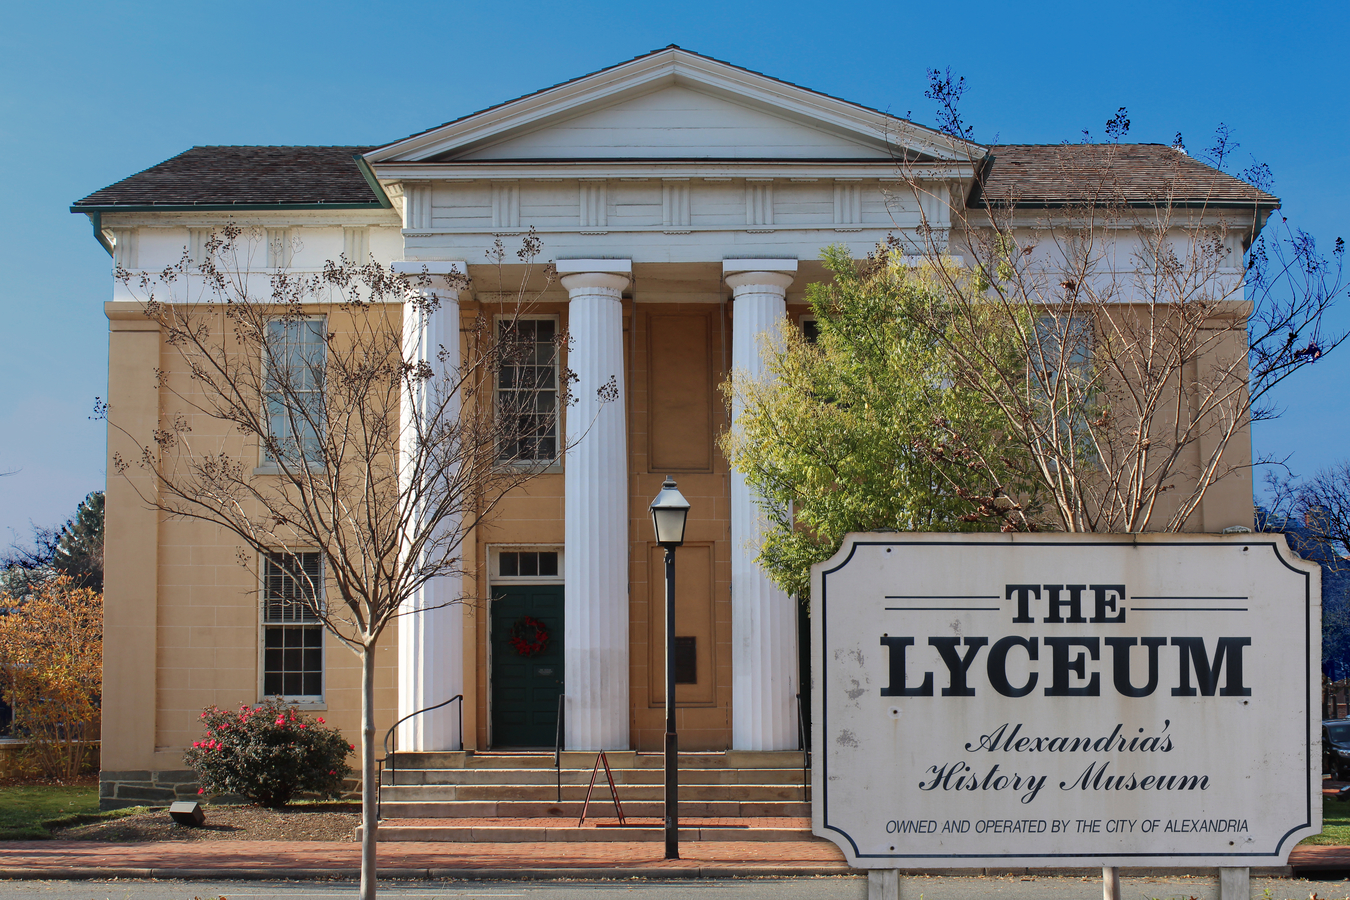 1 Lyce 4631 : The Lyceum opened in 1839 as a venue for education pursuits, today it is Alexandria's History Museum